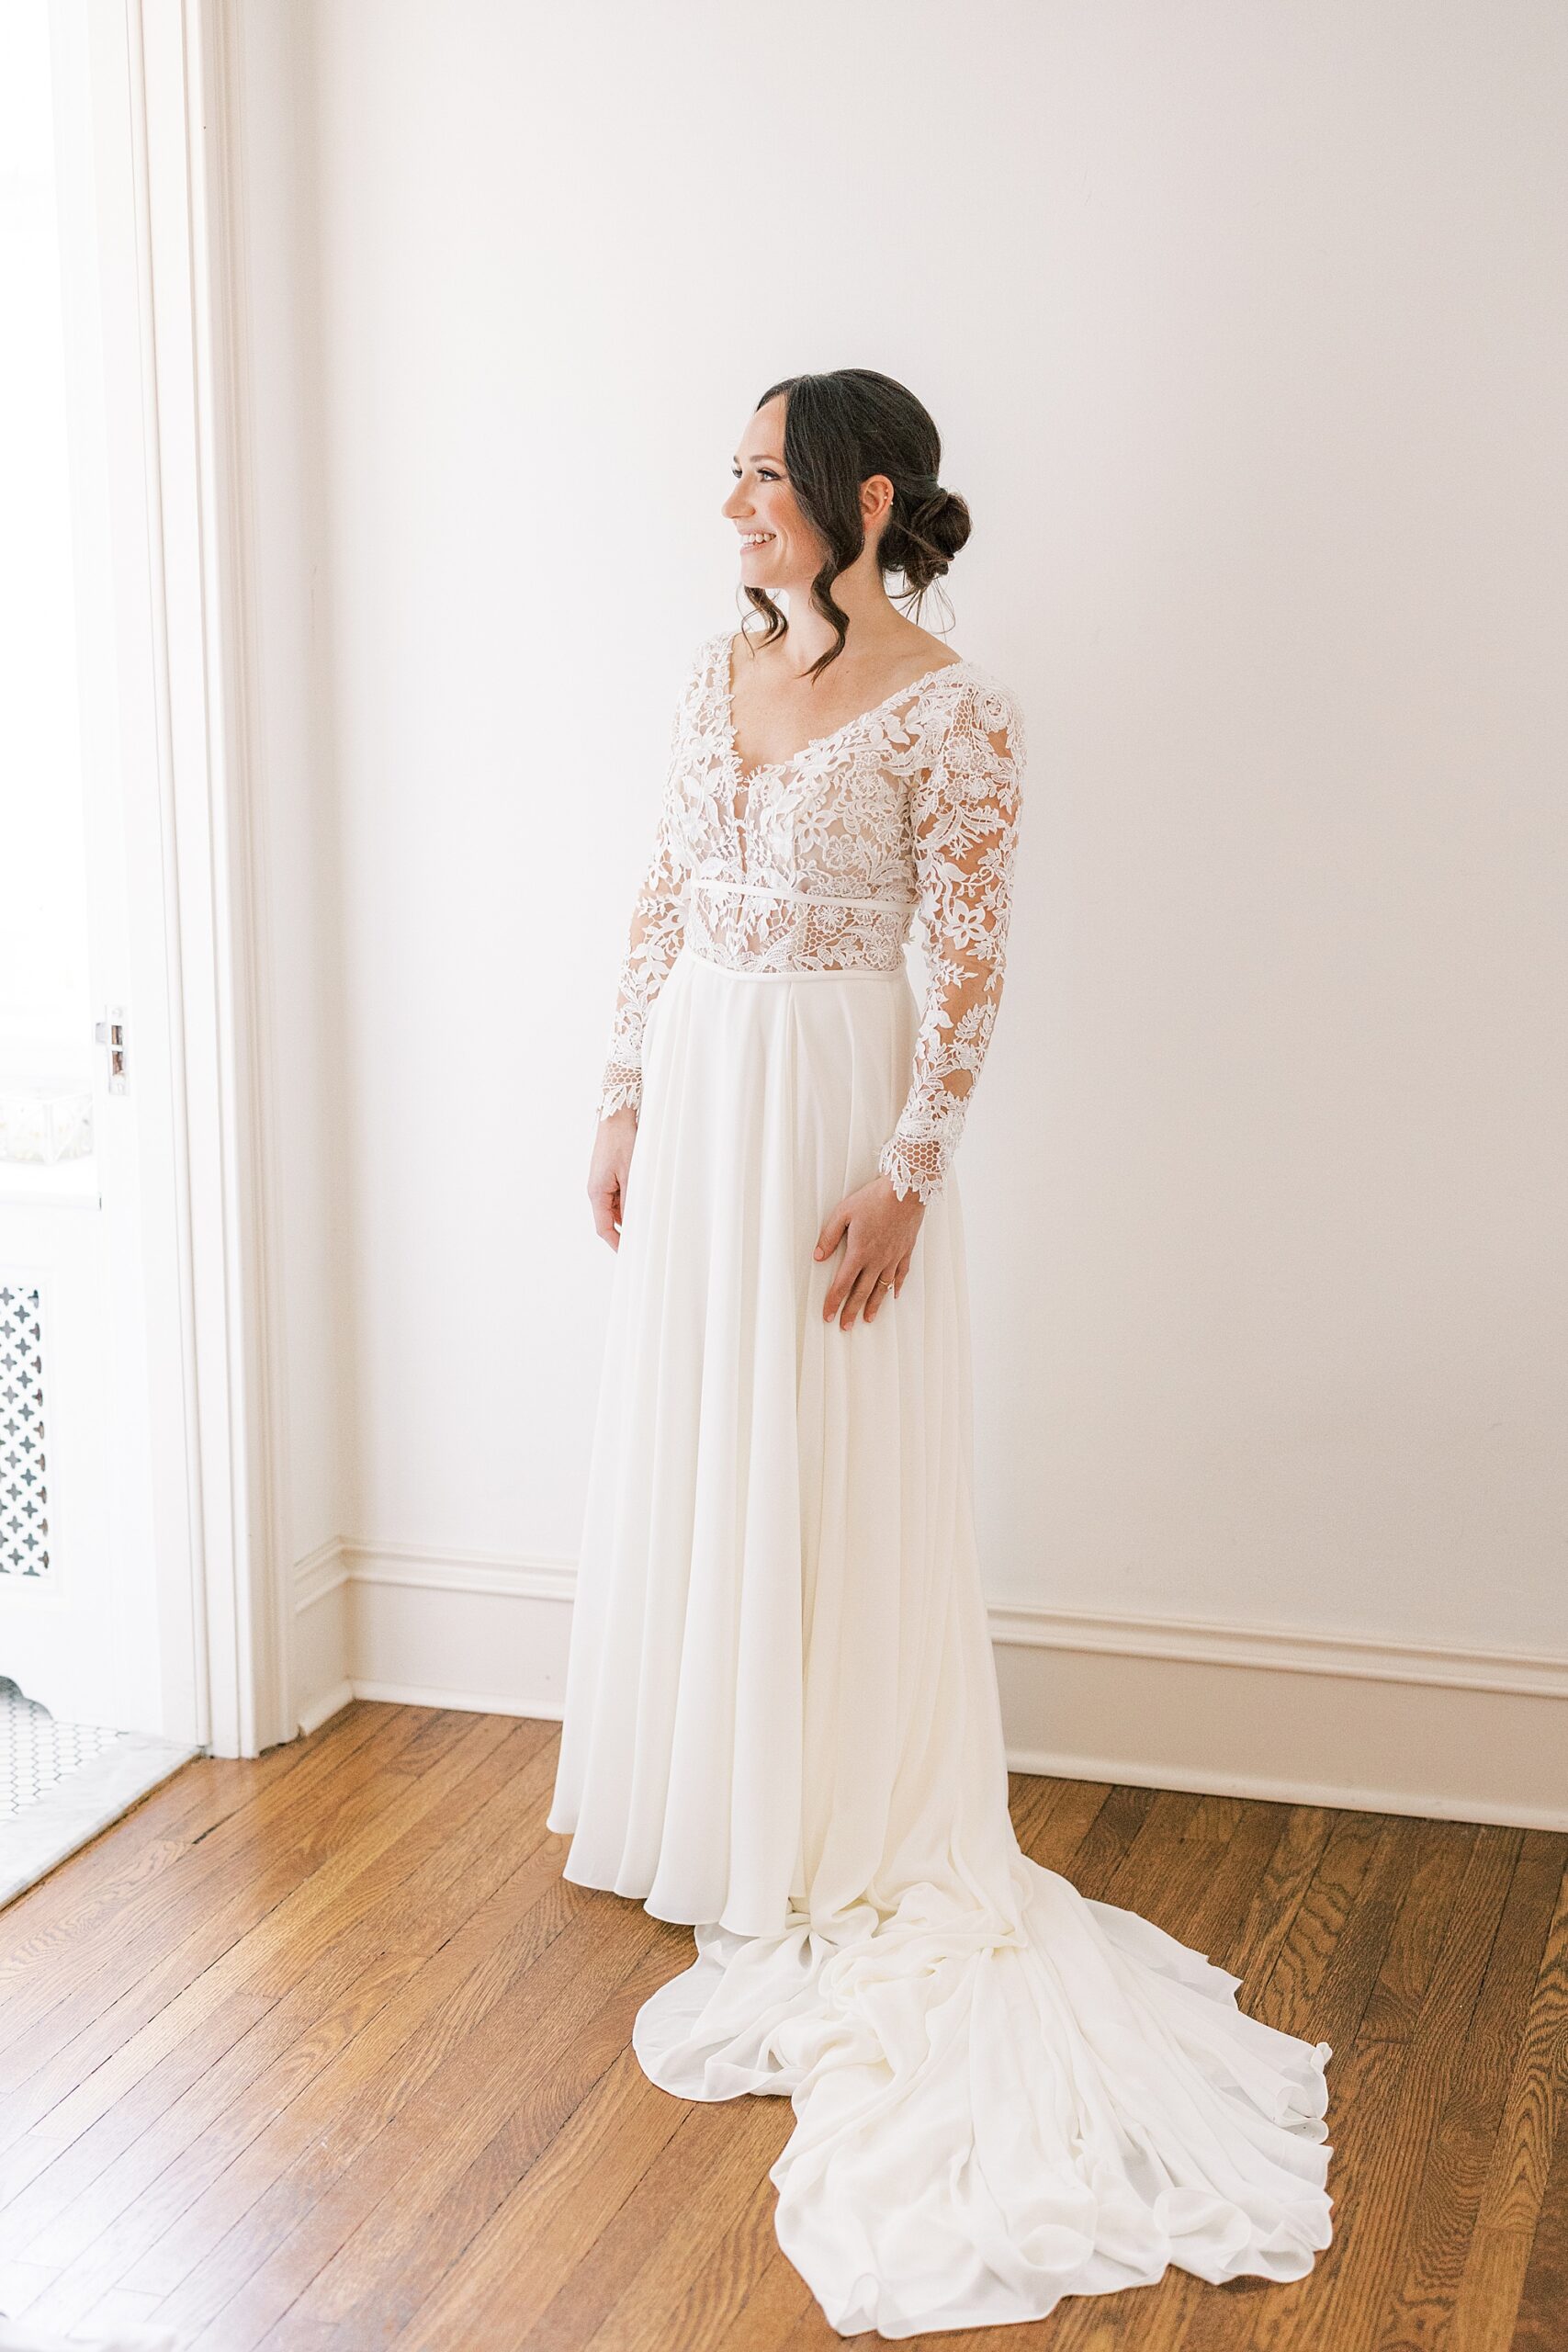 bride poses looking out window in wedding gown with lace sleeves